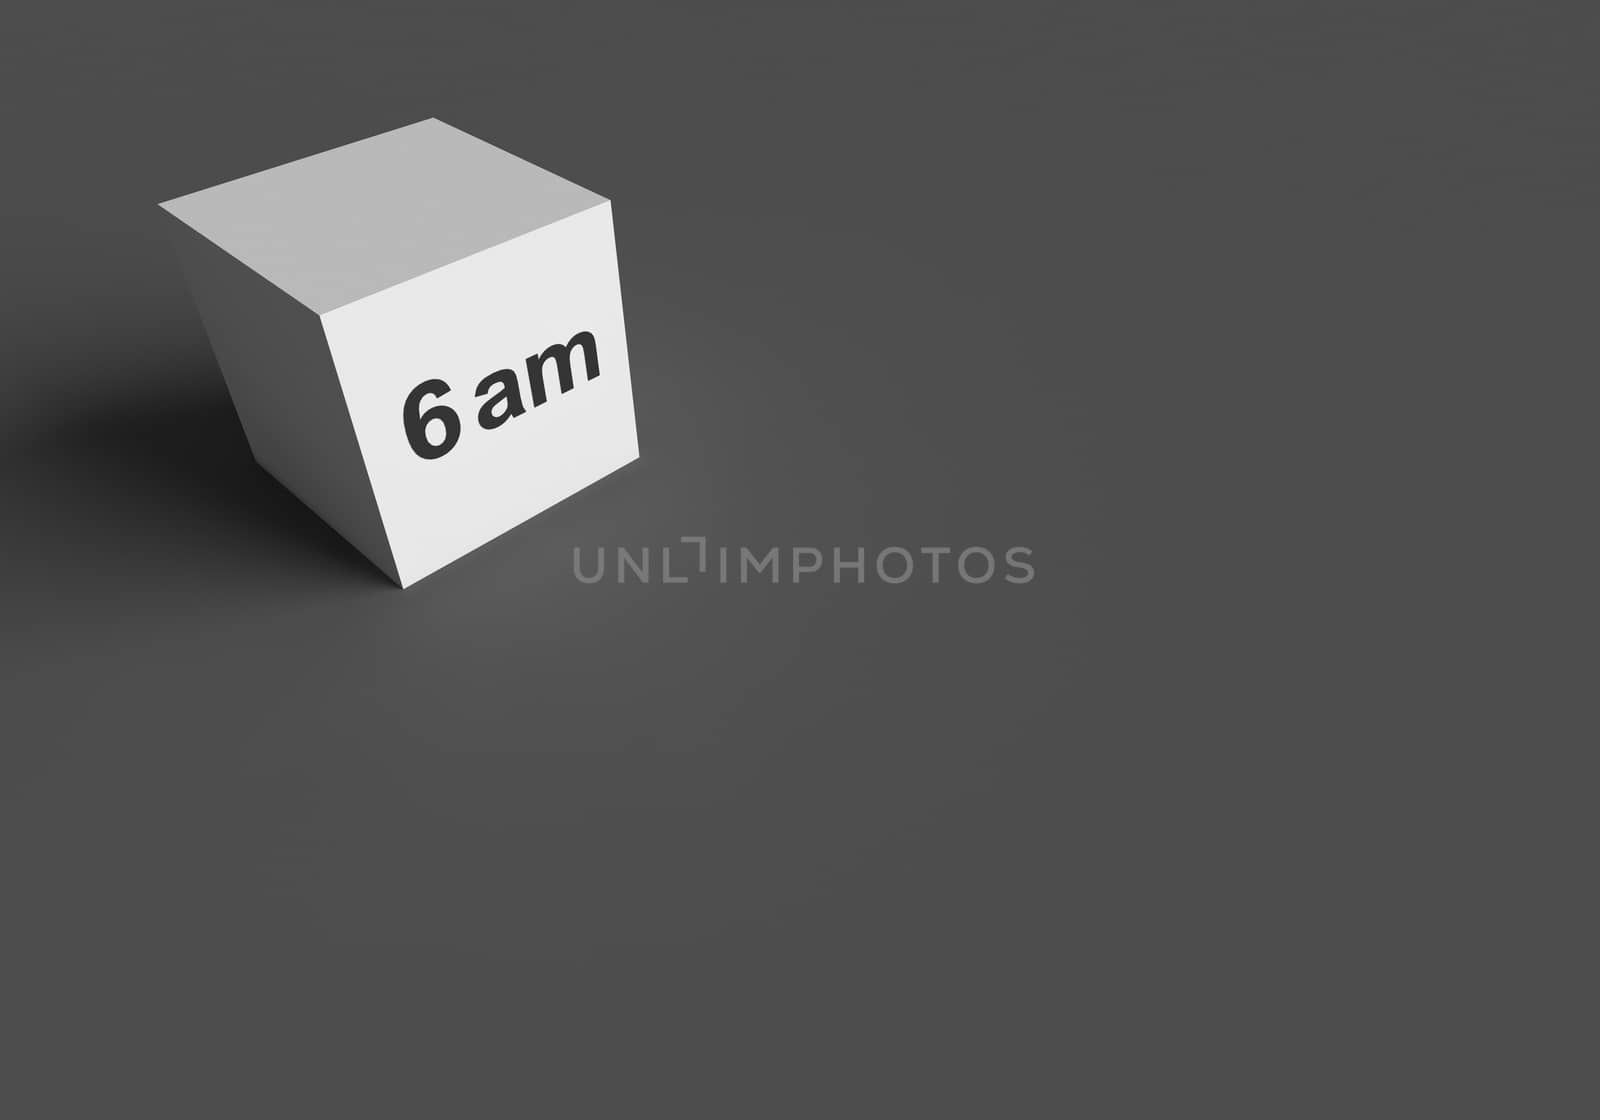 3D RENDERING WORDS 6 am ON WHITE CUBE by PrettyTG